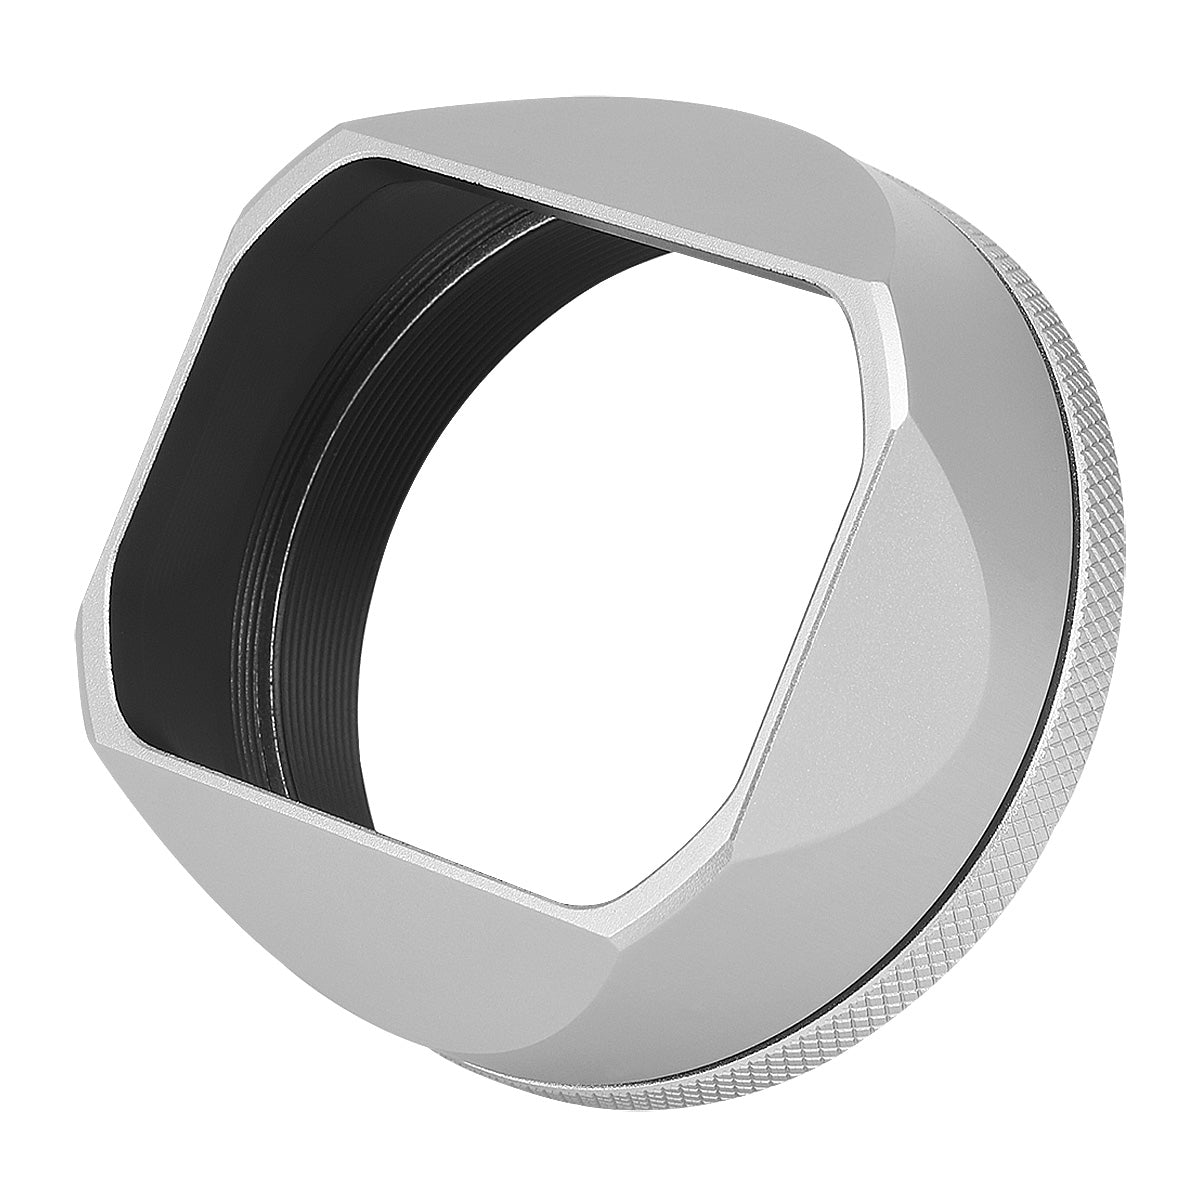 Haoge LH-X54W Square Metal Lens Hood with 49mm Adapter Ring for Fujifilm Fuji X100V Camera Silver